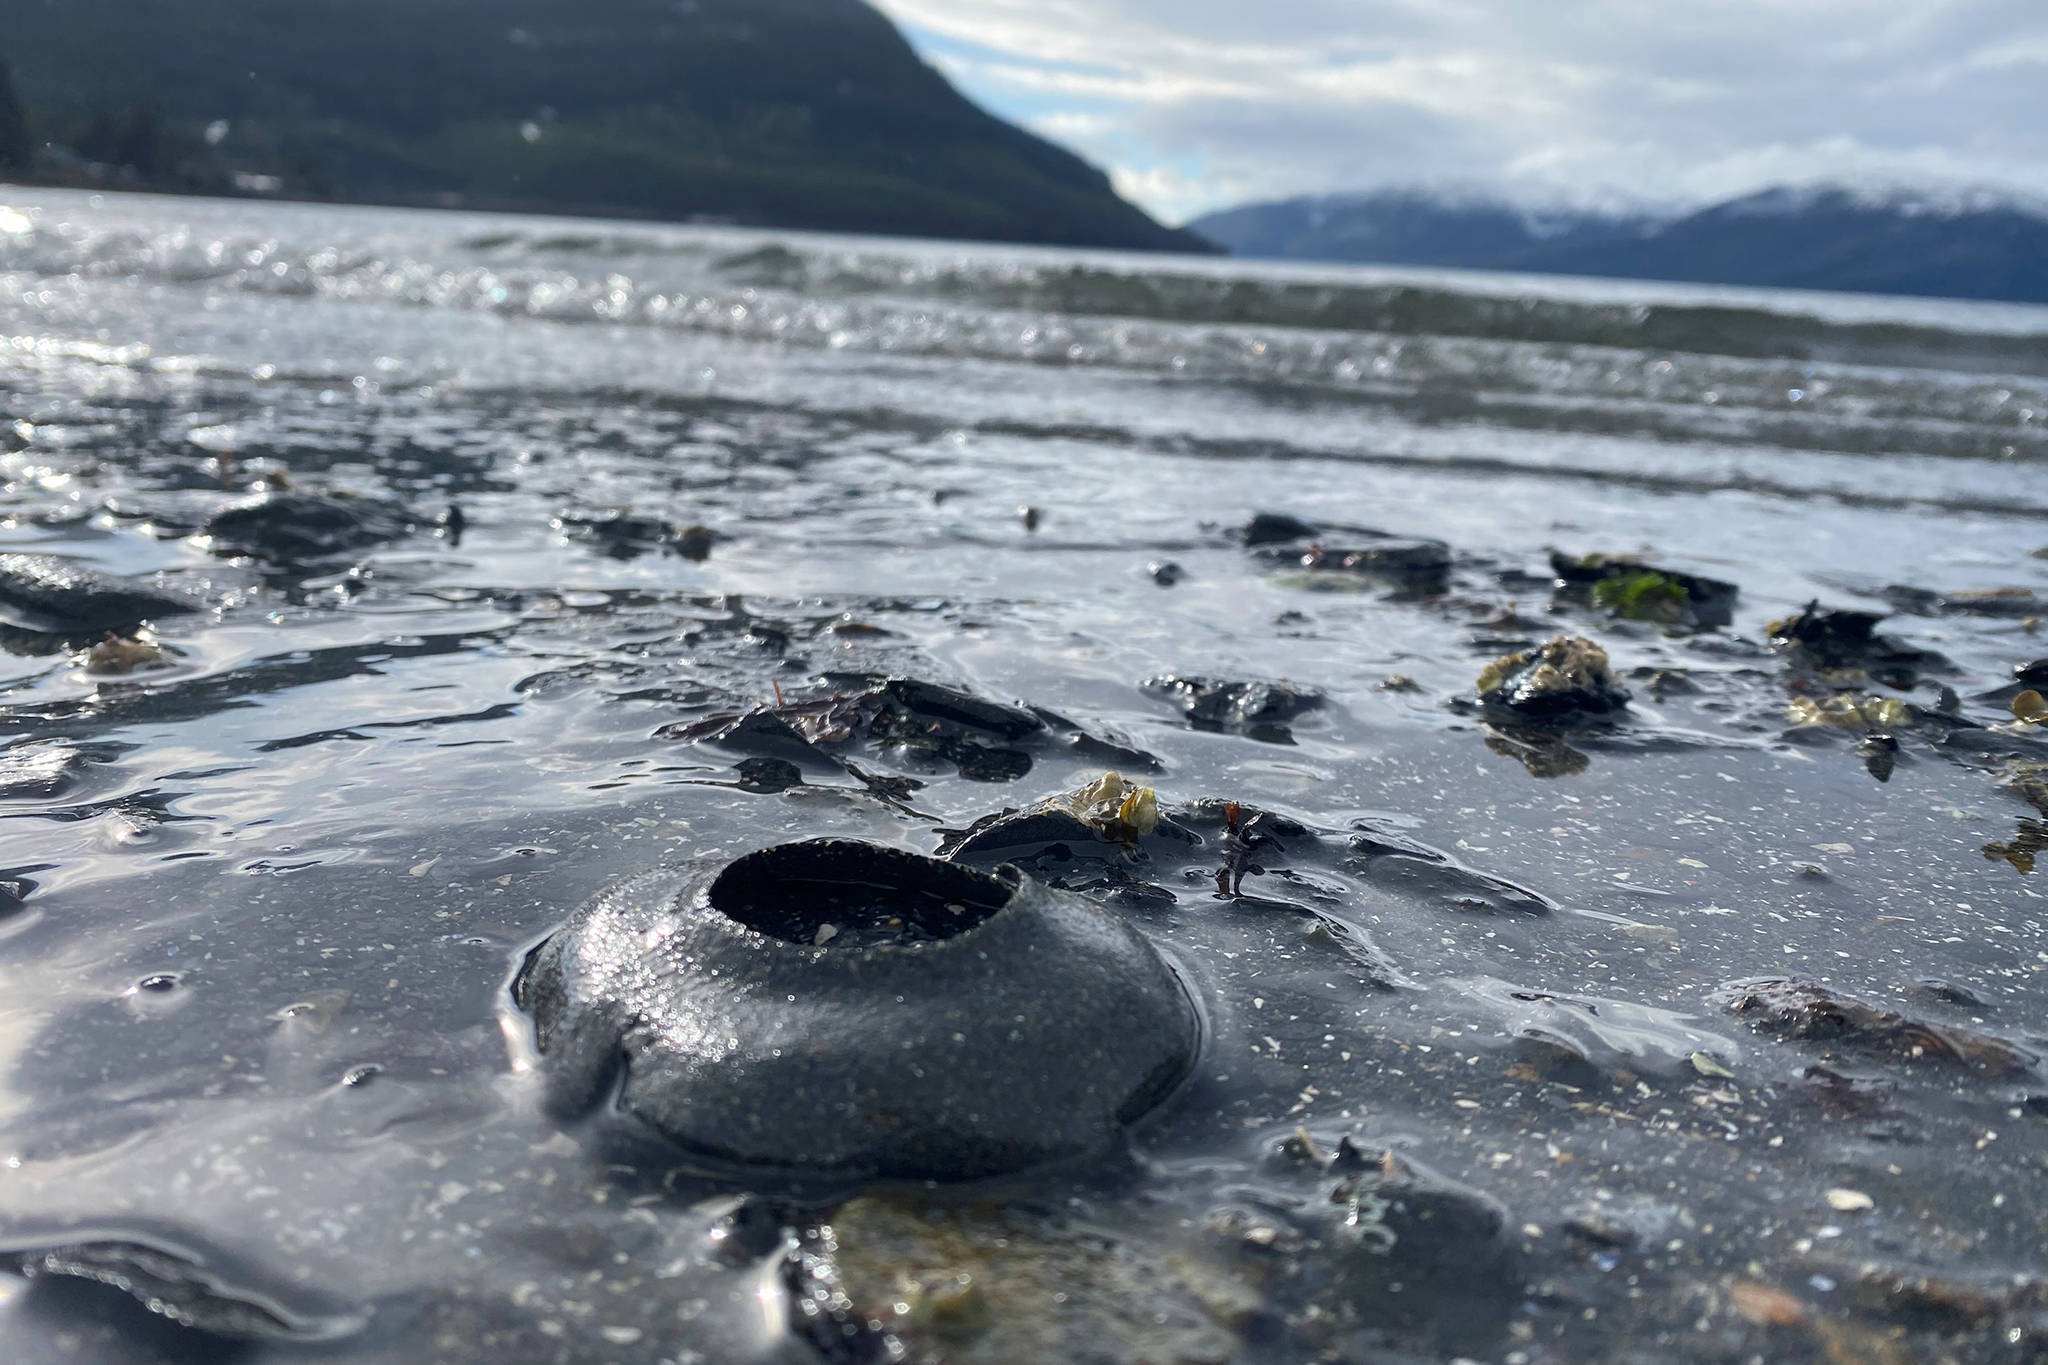 This photo shows a moon snail nest at Institute Beach in Wrangell. (Vivian Faith Prescott / For the Capital City Weekly)